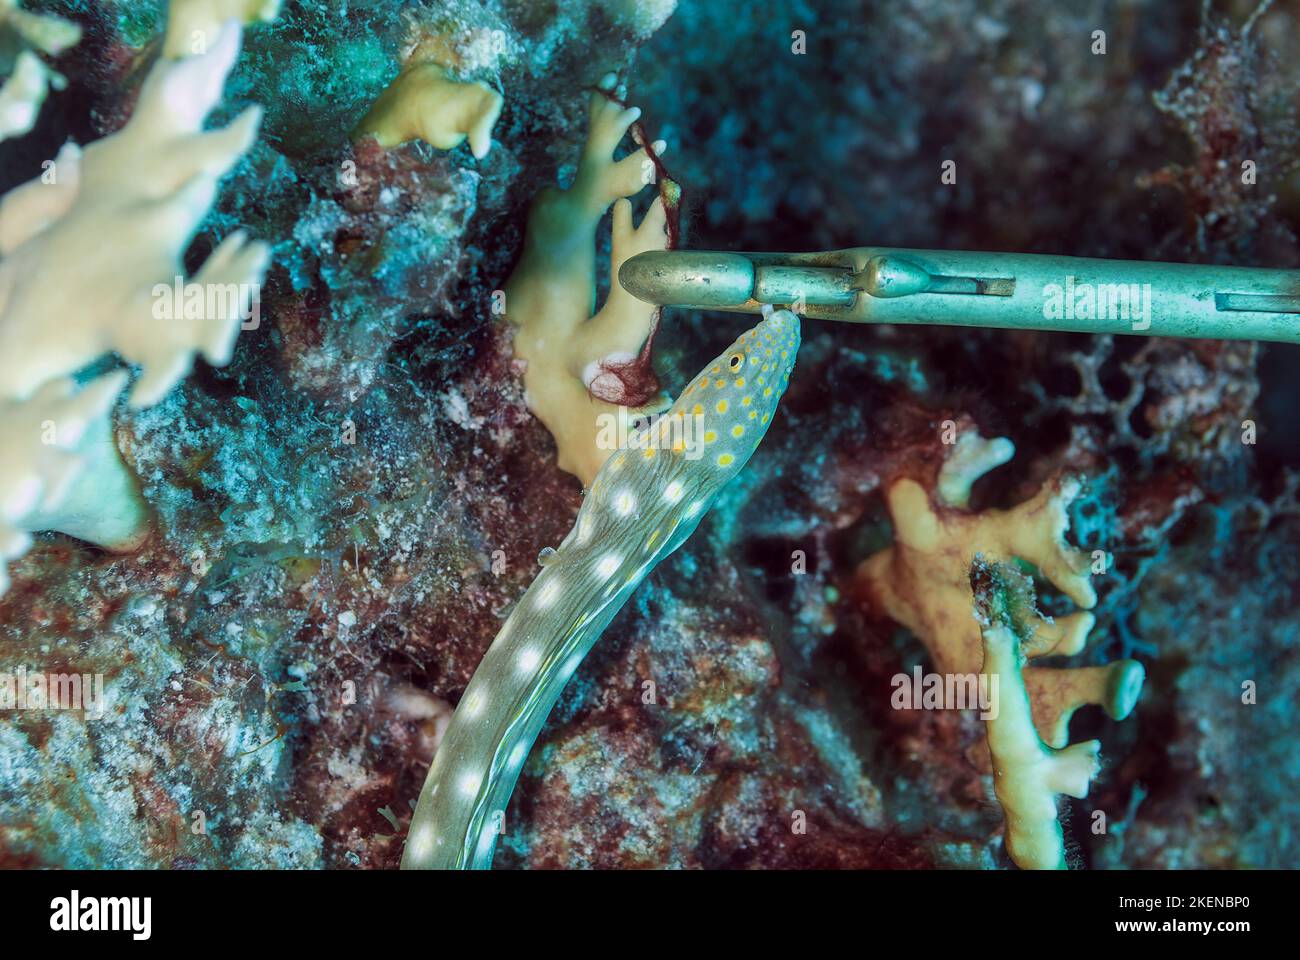 A Sharptail Eel Myrichthys breviceps next to a fastener Stock Photo